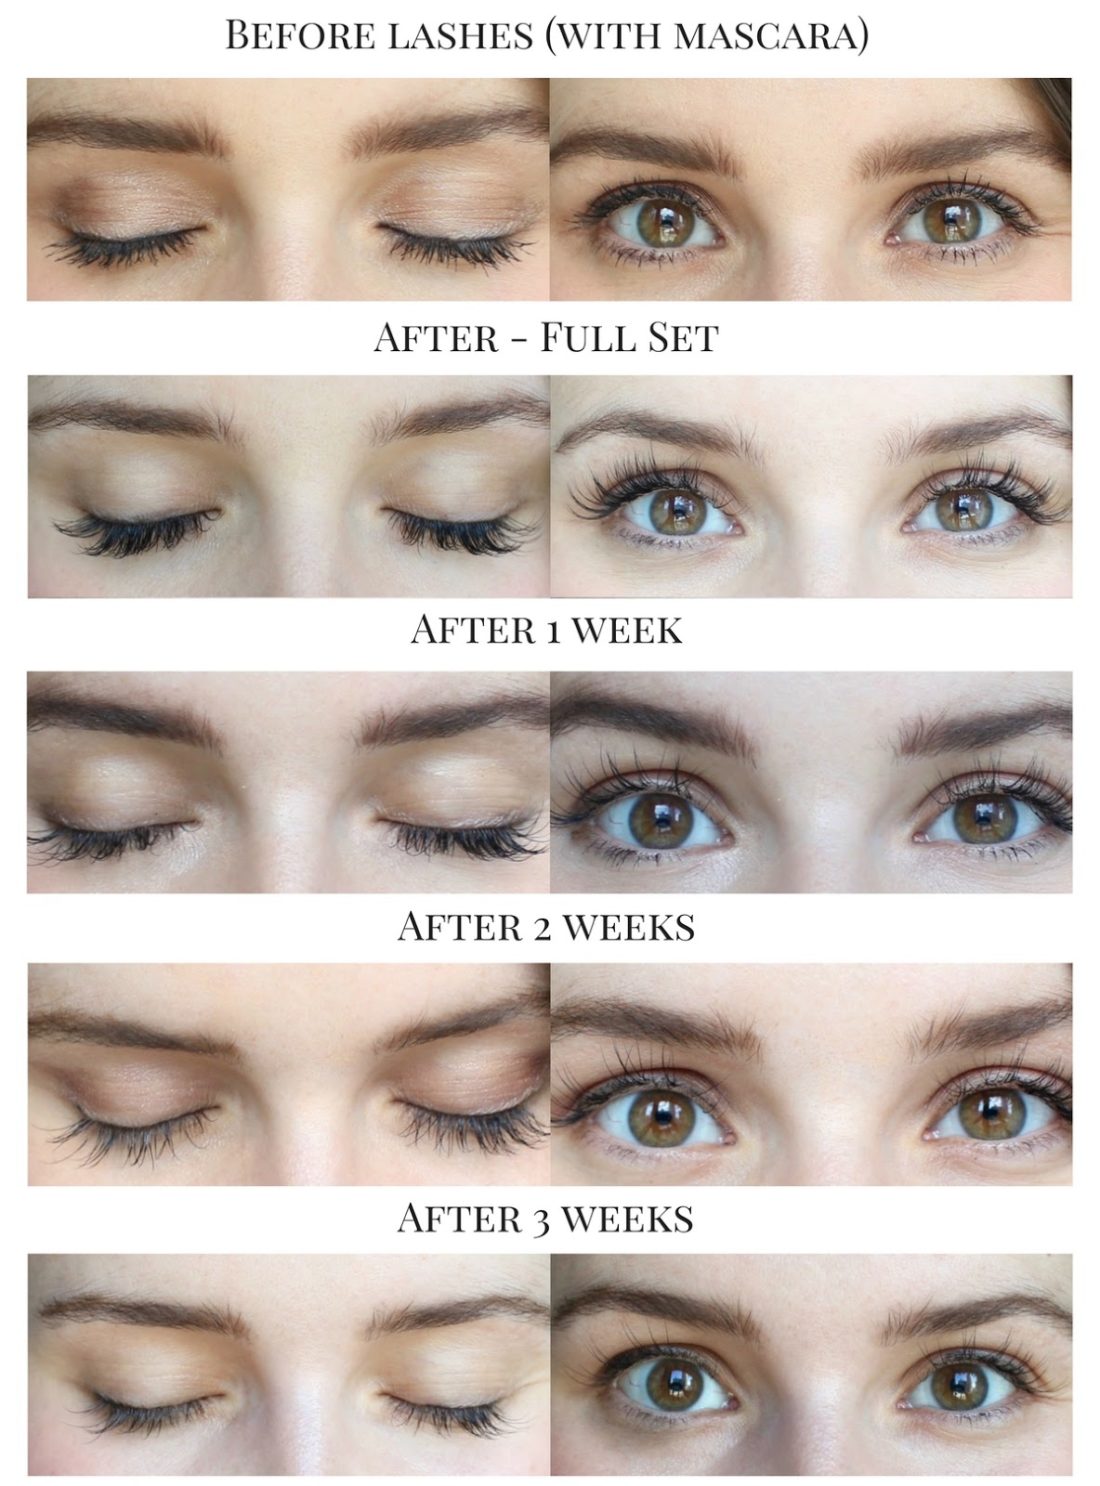 10-things-to-know-before-getting-eyelash-extensions-medicine-manicures